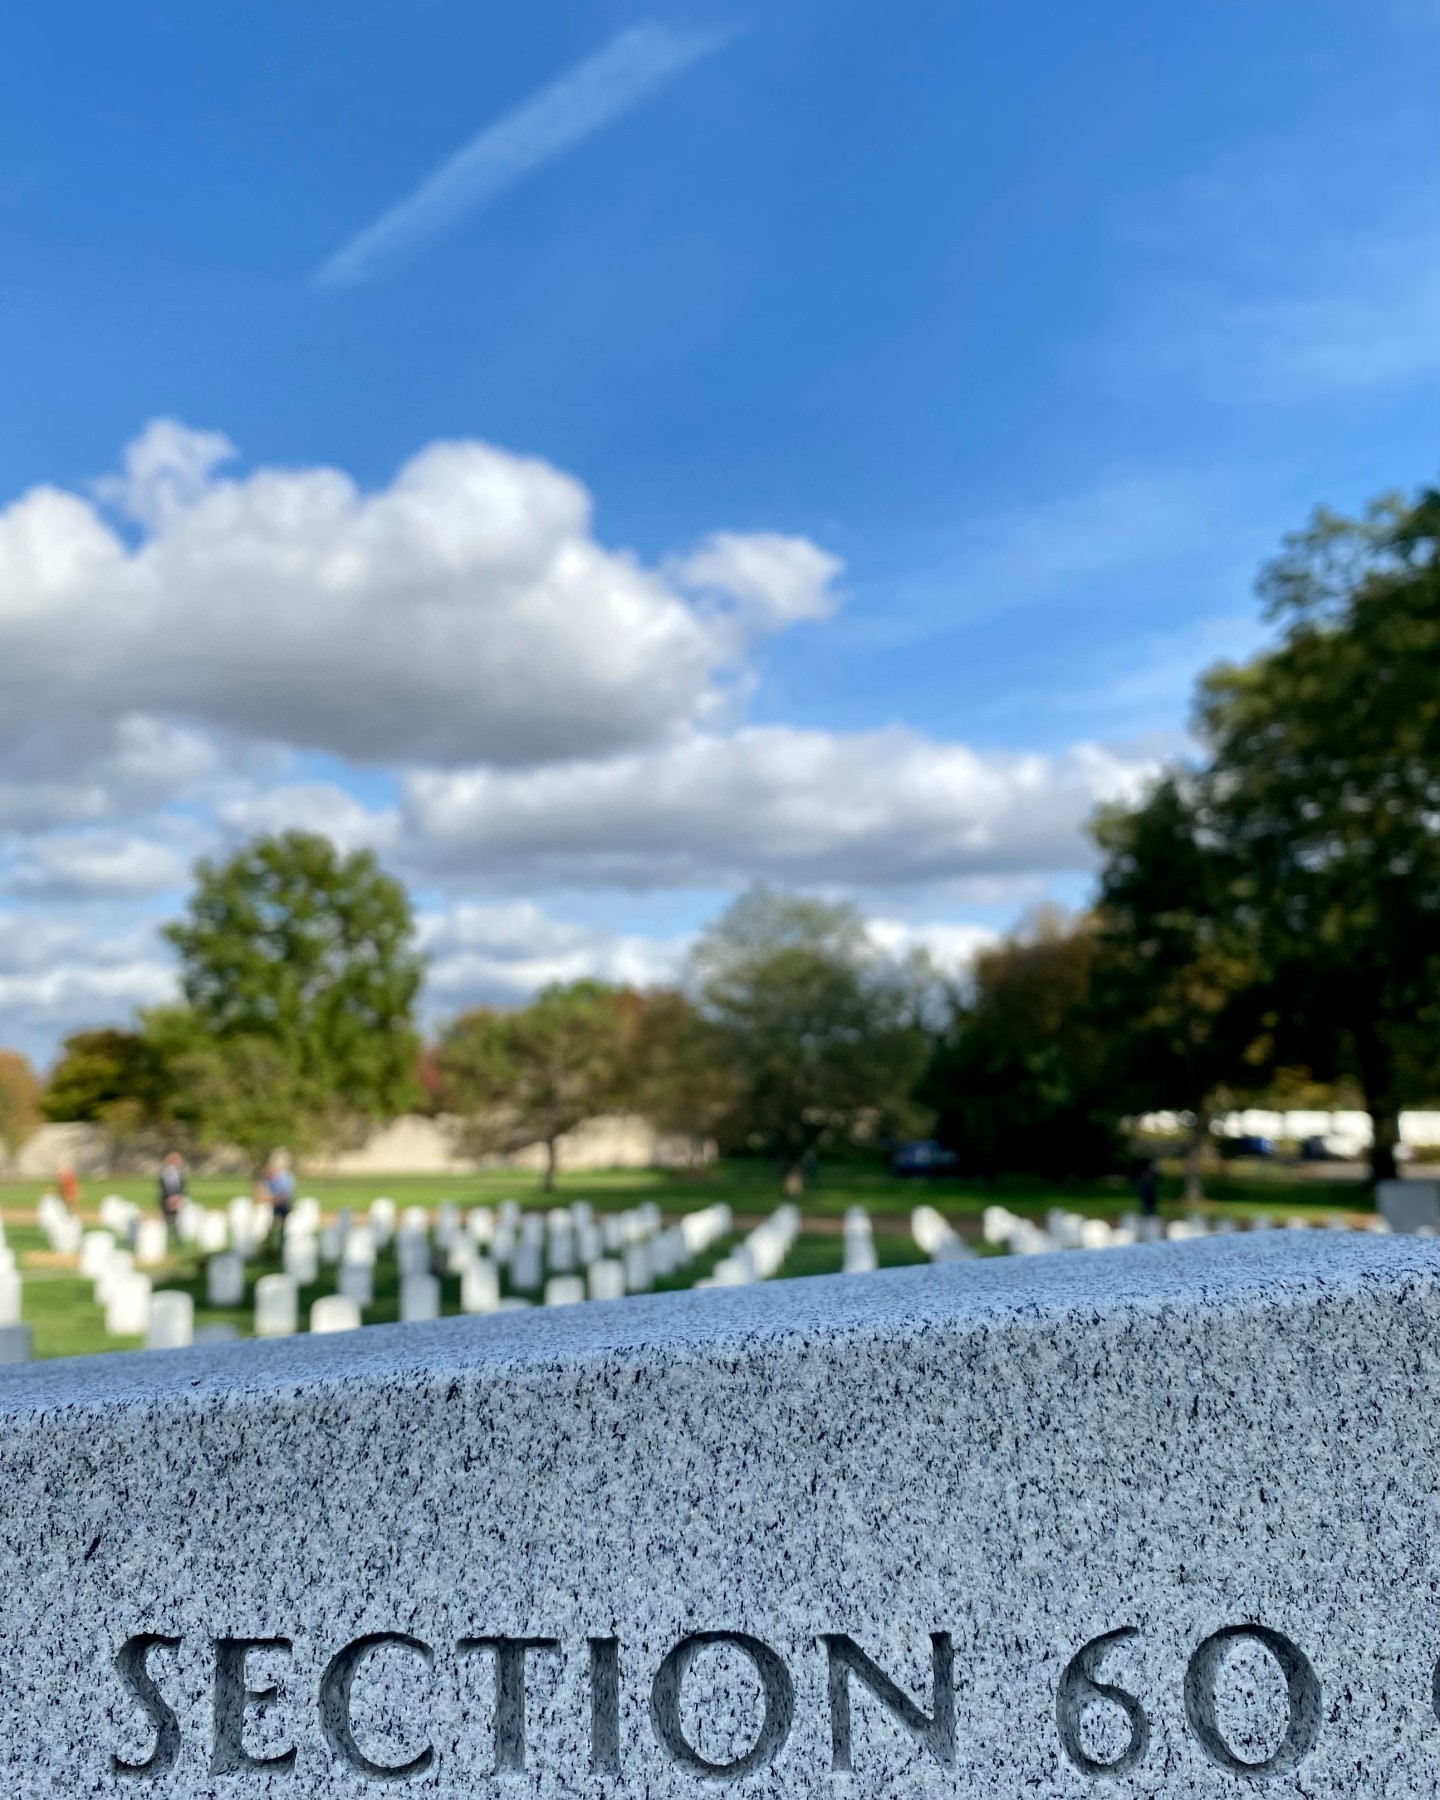 Looking  out over Section 60 at Arlington National Cemetery.